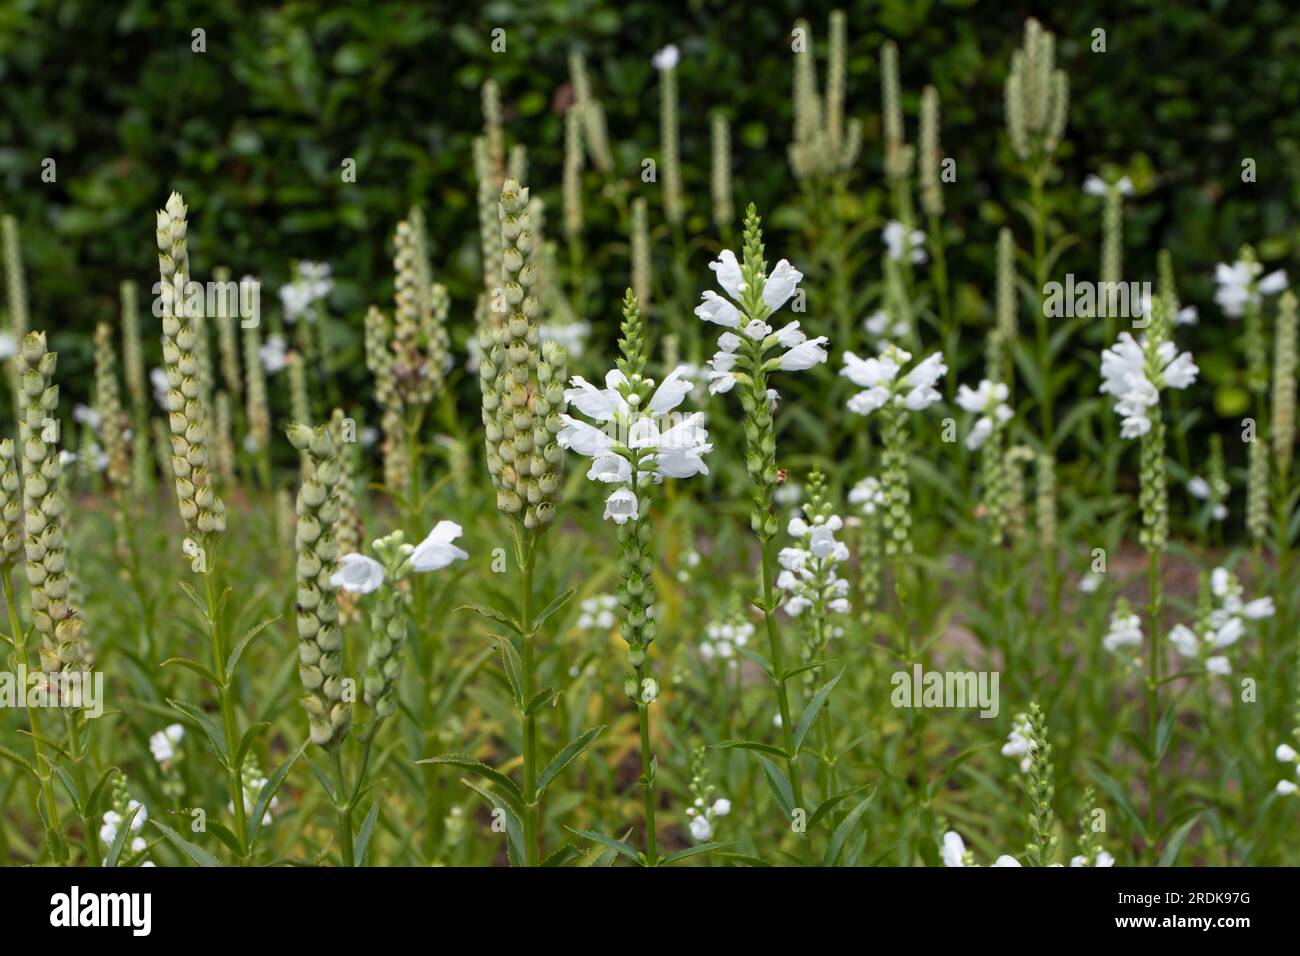 Physostegia virginiana or obedient plant with white flowers and fruits Stock Photo